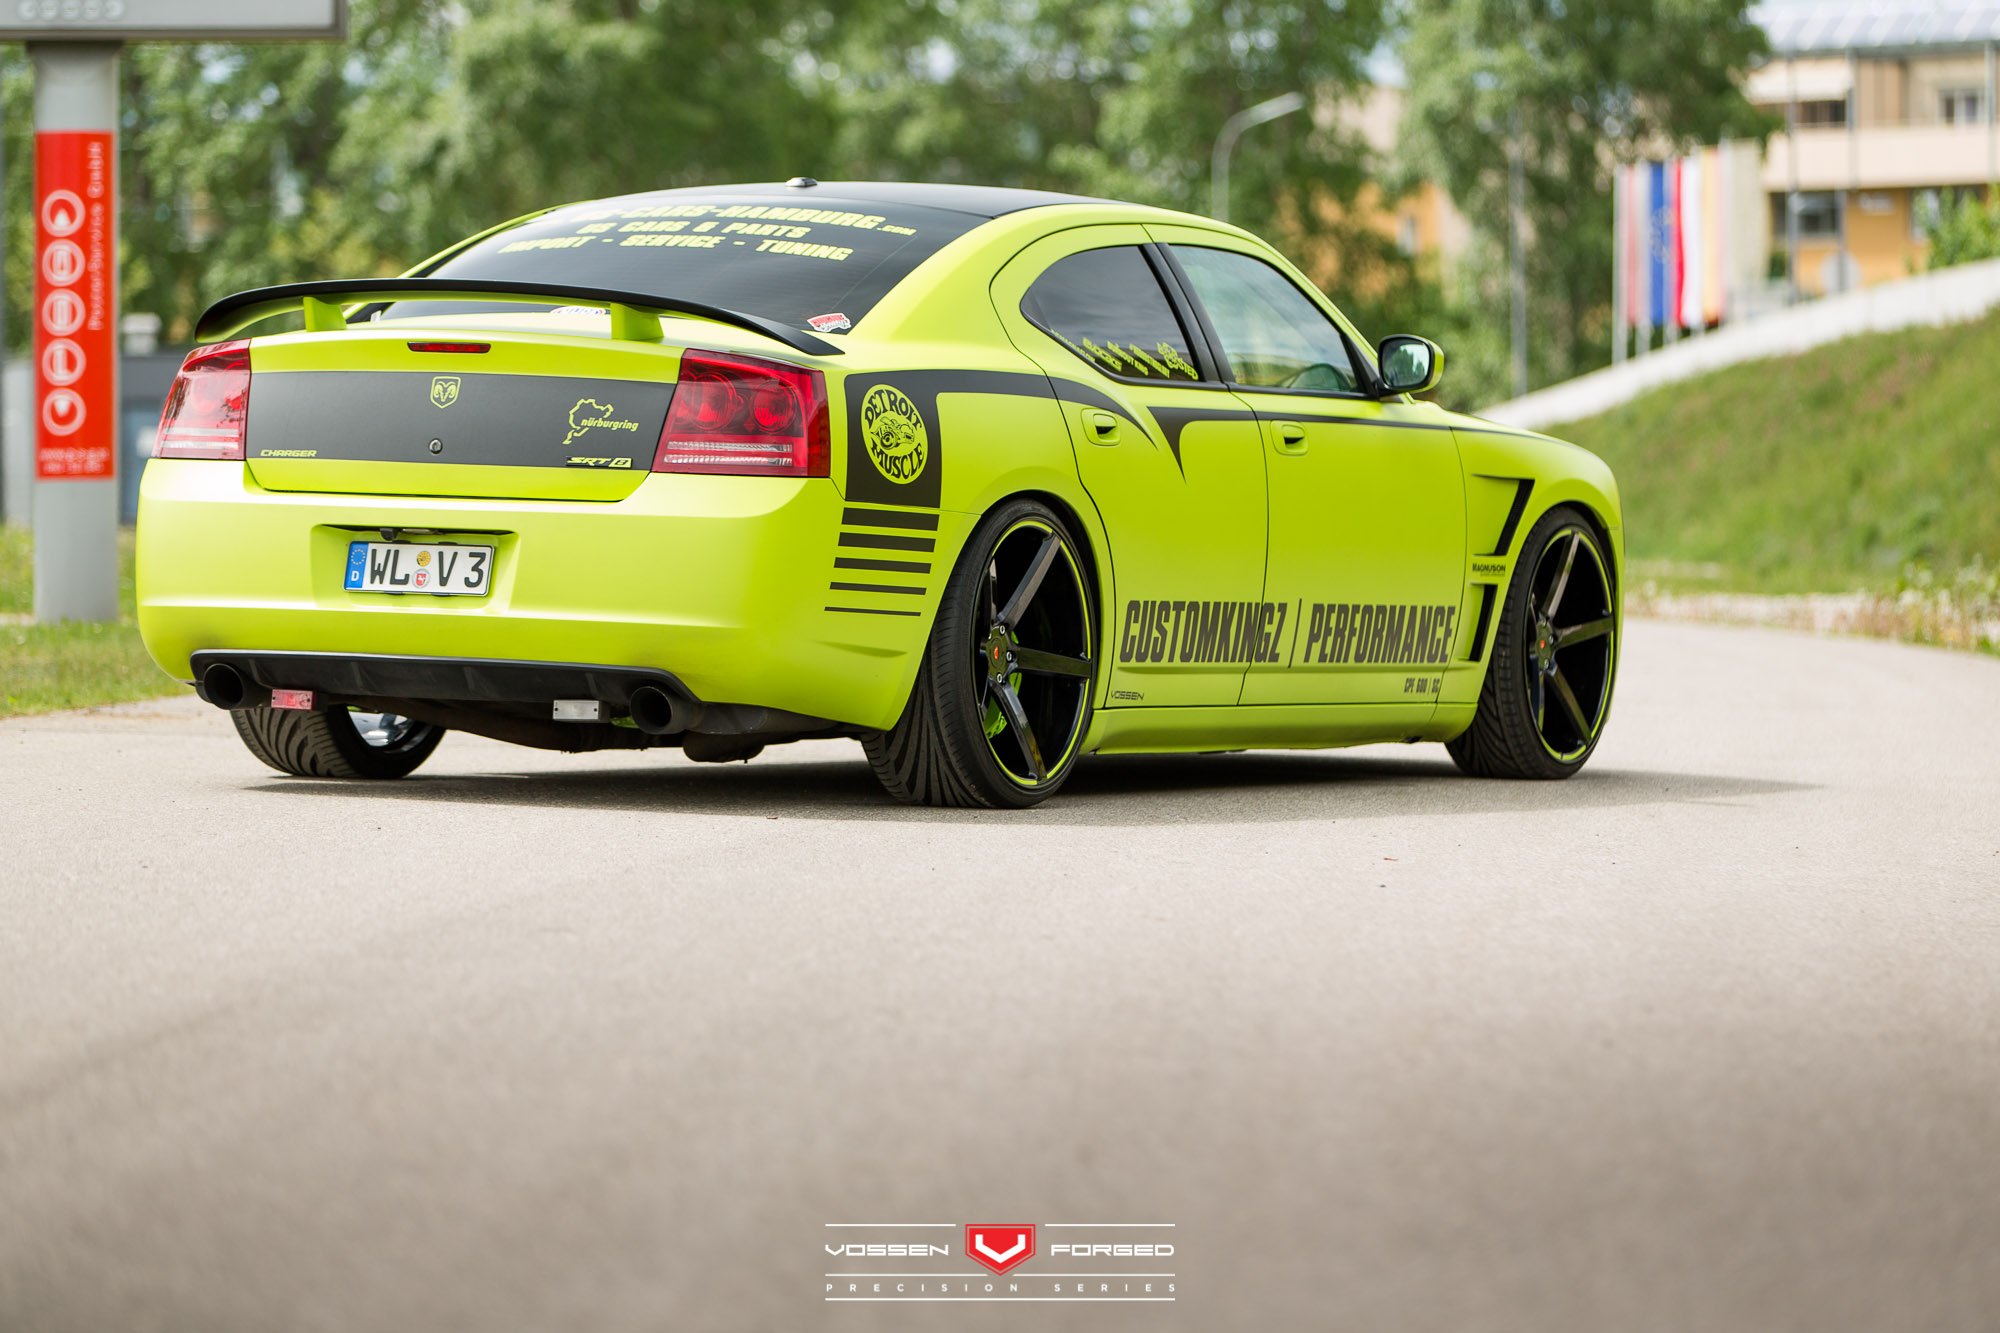 Lime Yellow Dodge Charger with Custom Rear Diffuser - Photo by Vossen